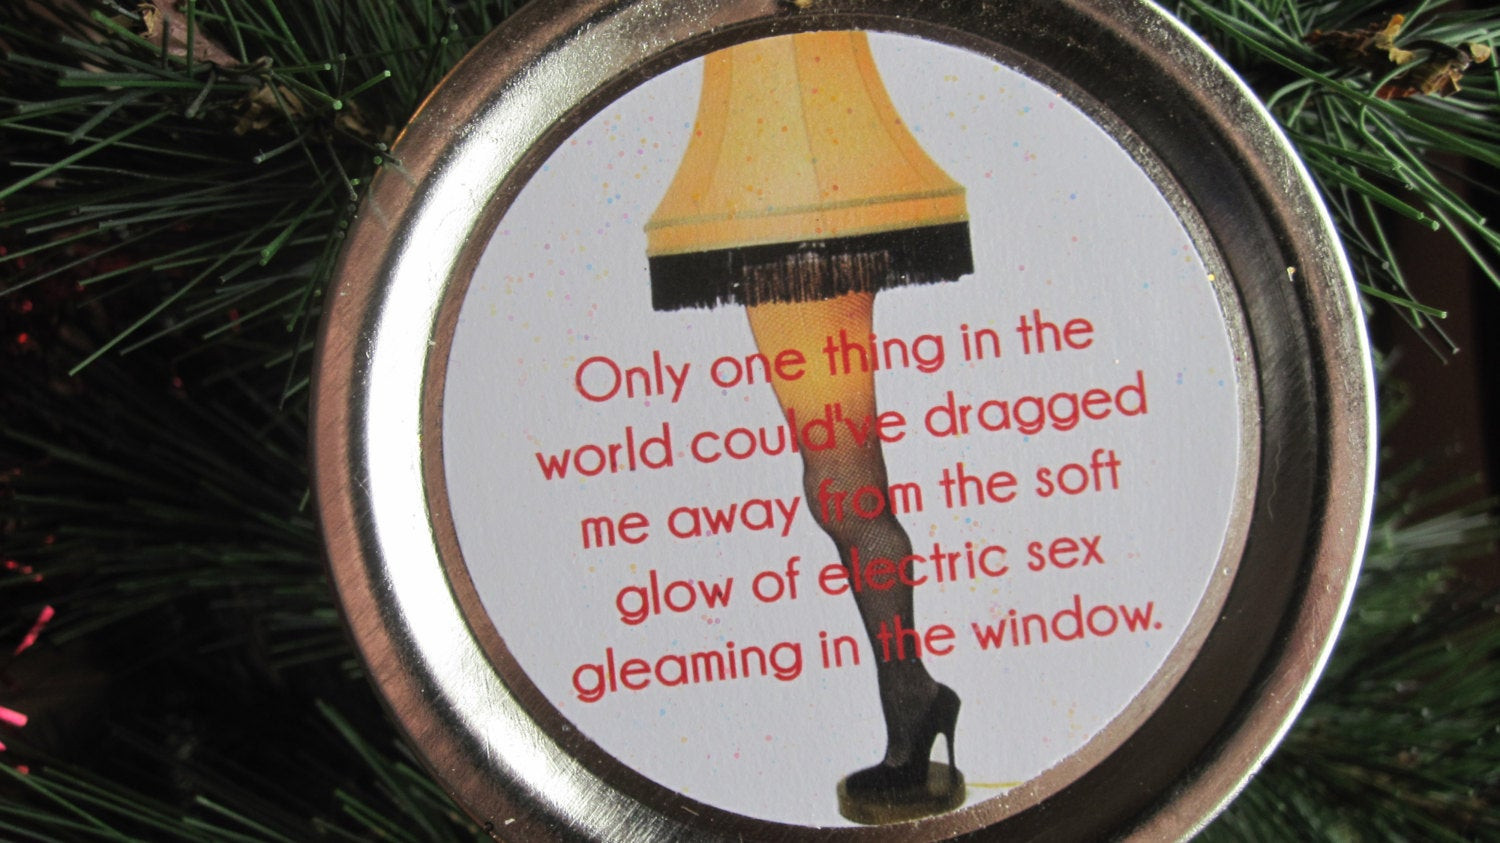 Christmas Story Lamp Quotes
 A Christmas Story Ornament Funny Movie Quote by